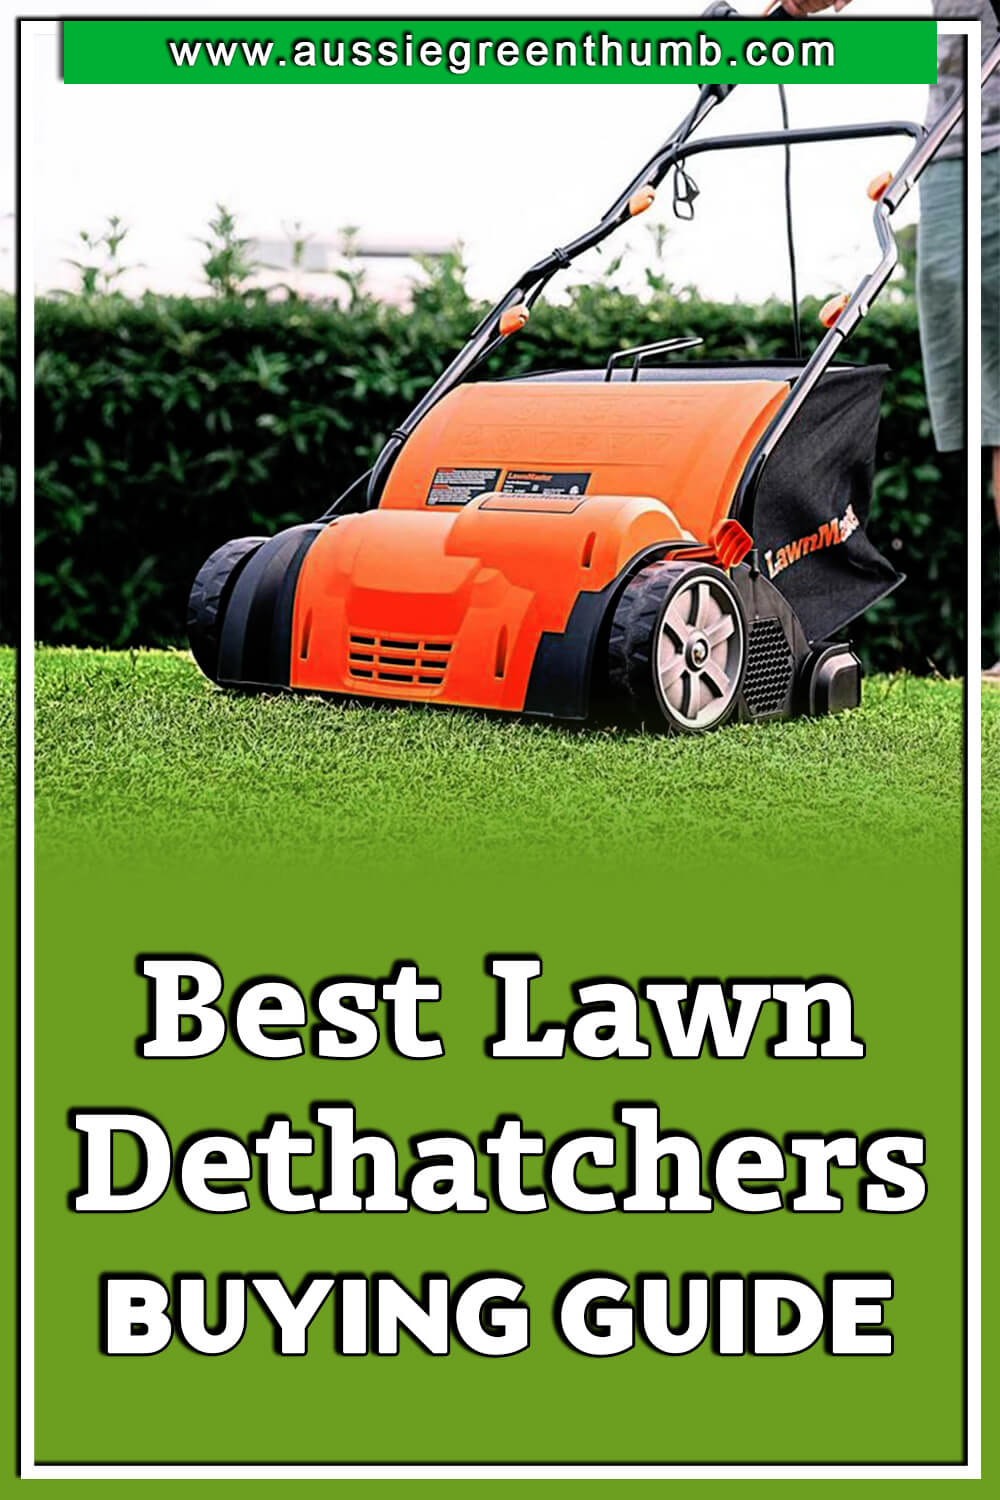 Best Lawn Dethatchers Buying Guide